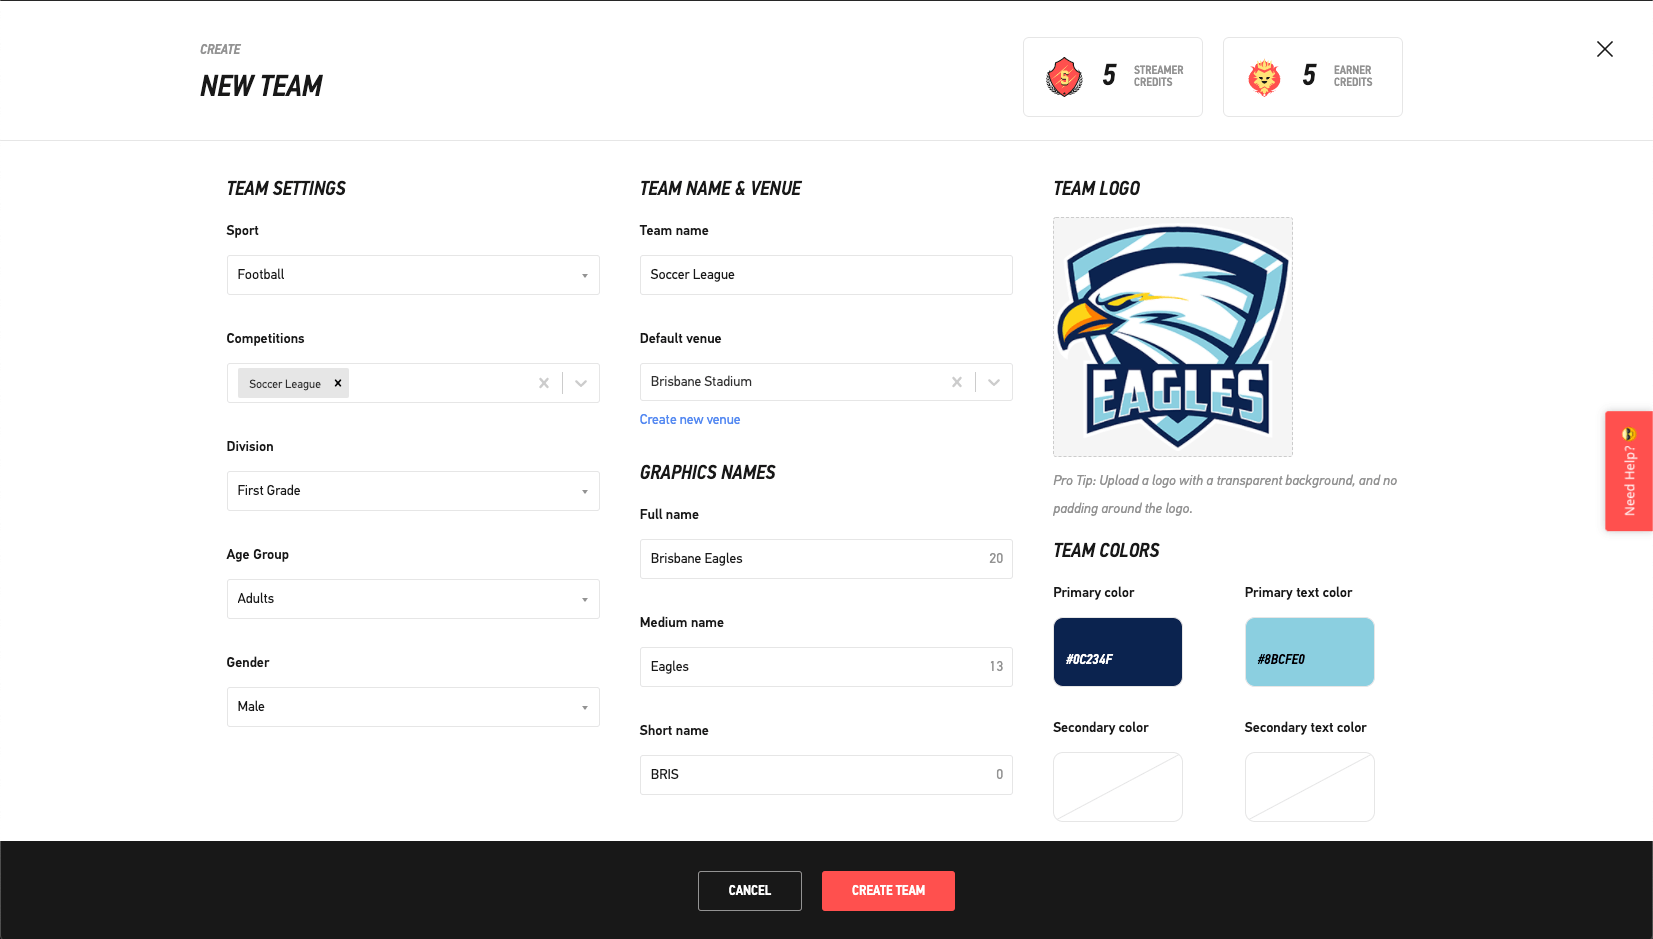 Create your first team, complete the required details and click "Create Team".